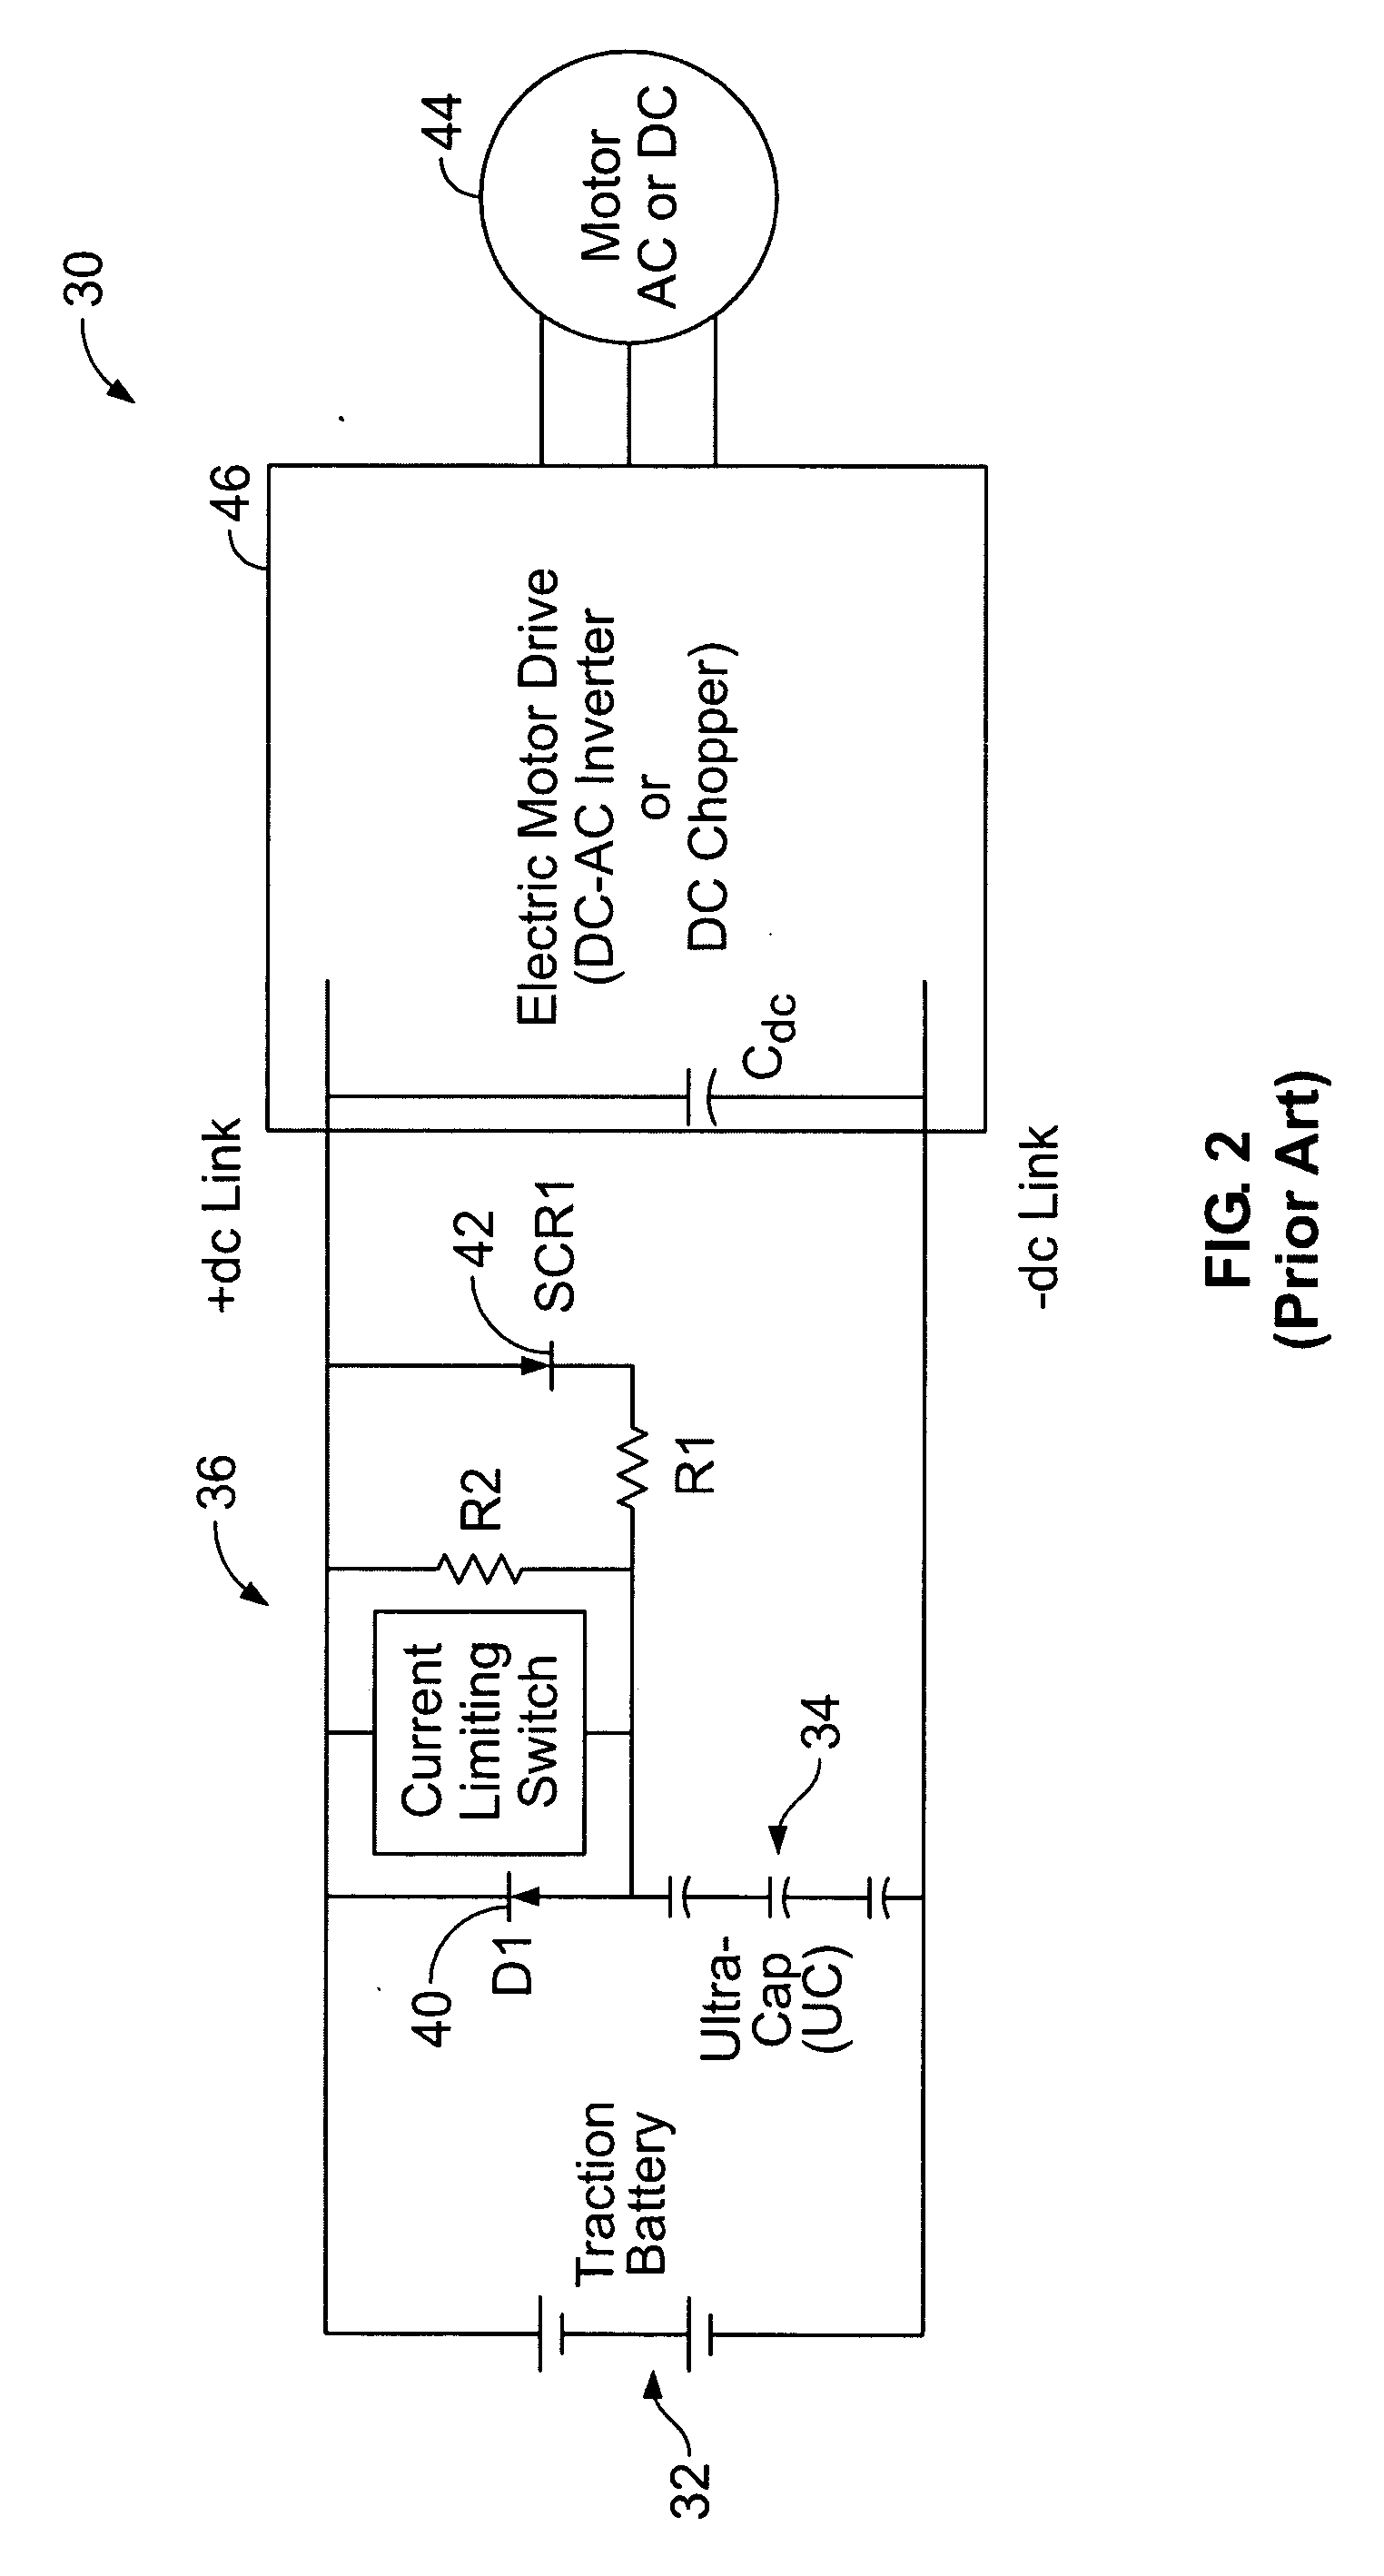 Energy storage system for electric or hybrid vehicle